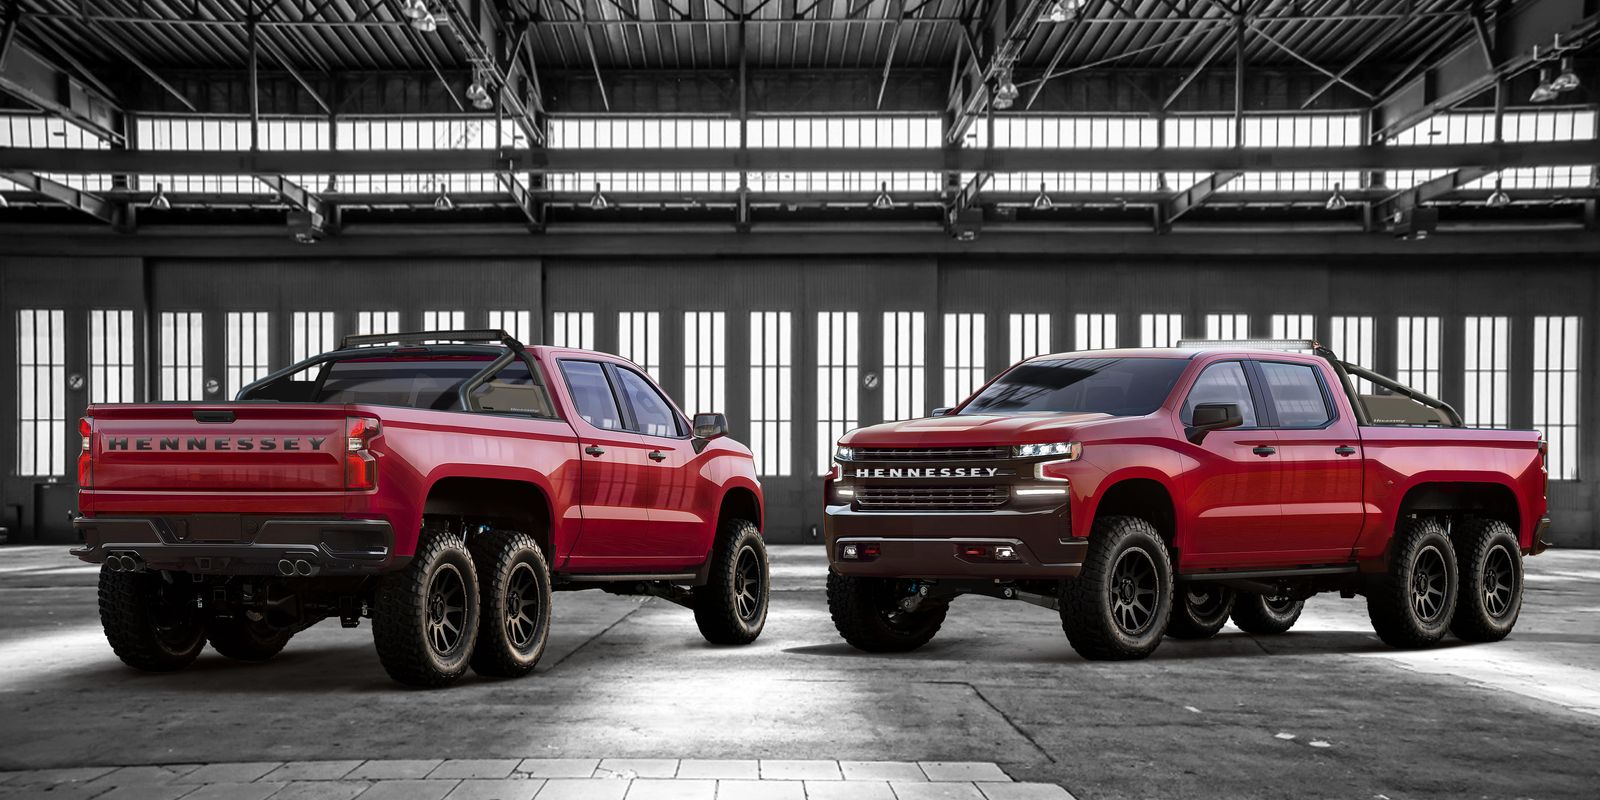 HENNESSEY-GOLIATH-6X6-3-Both-Red